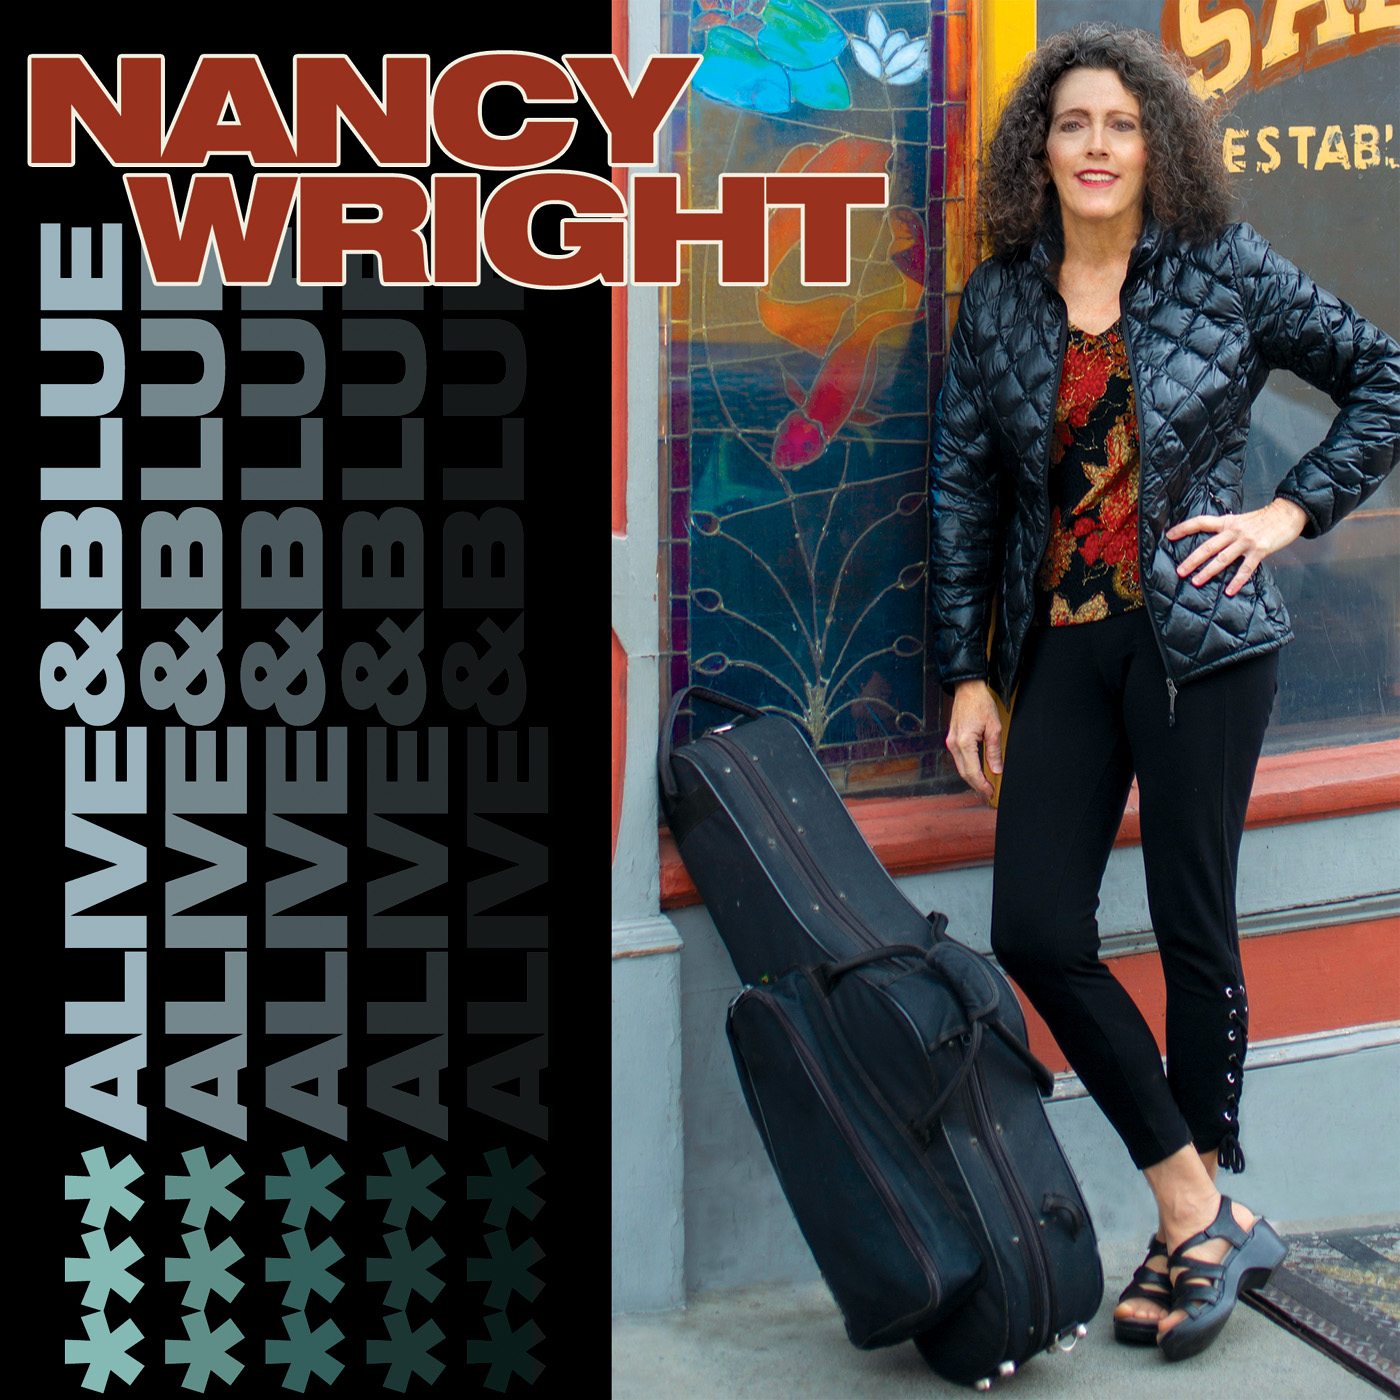 NANCY WRIGHT - Alive & Blue cover 